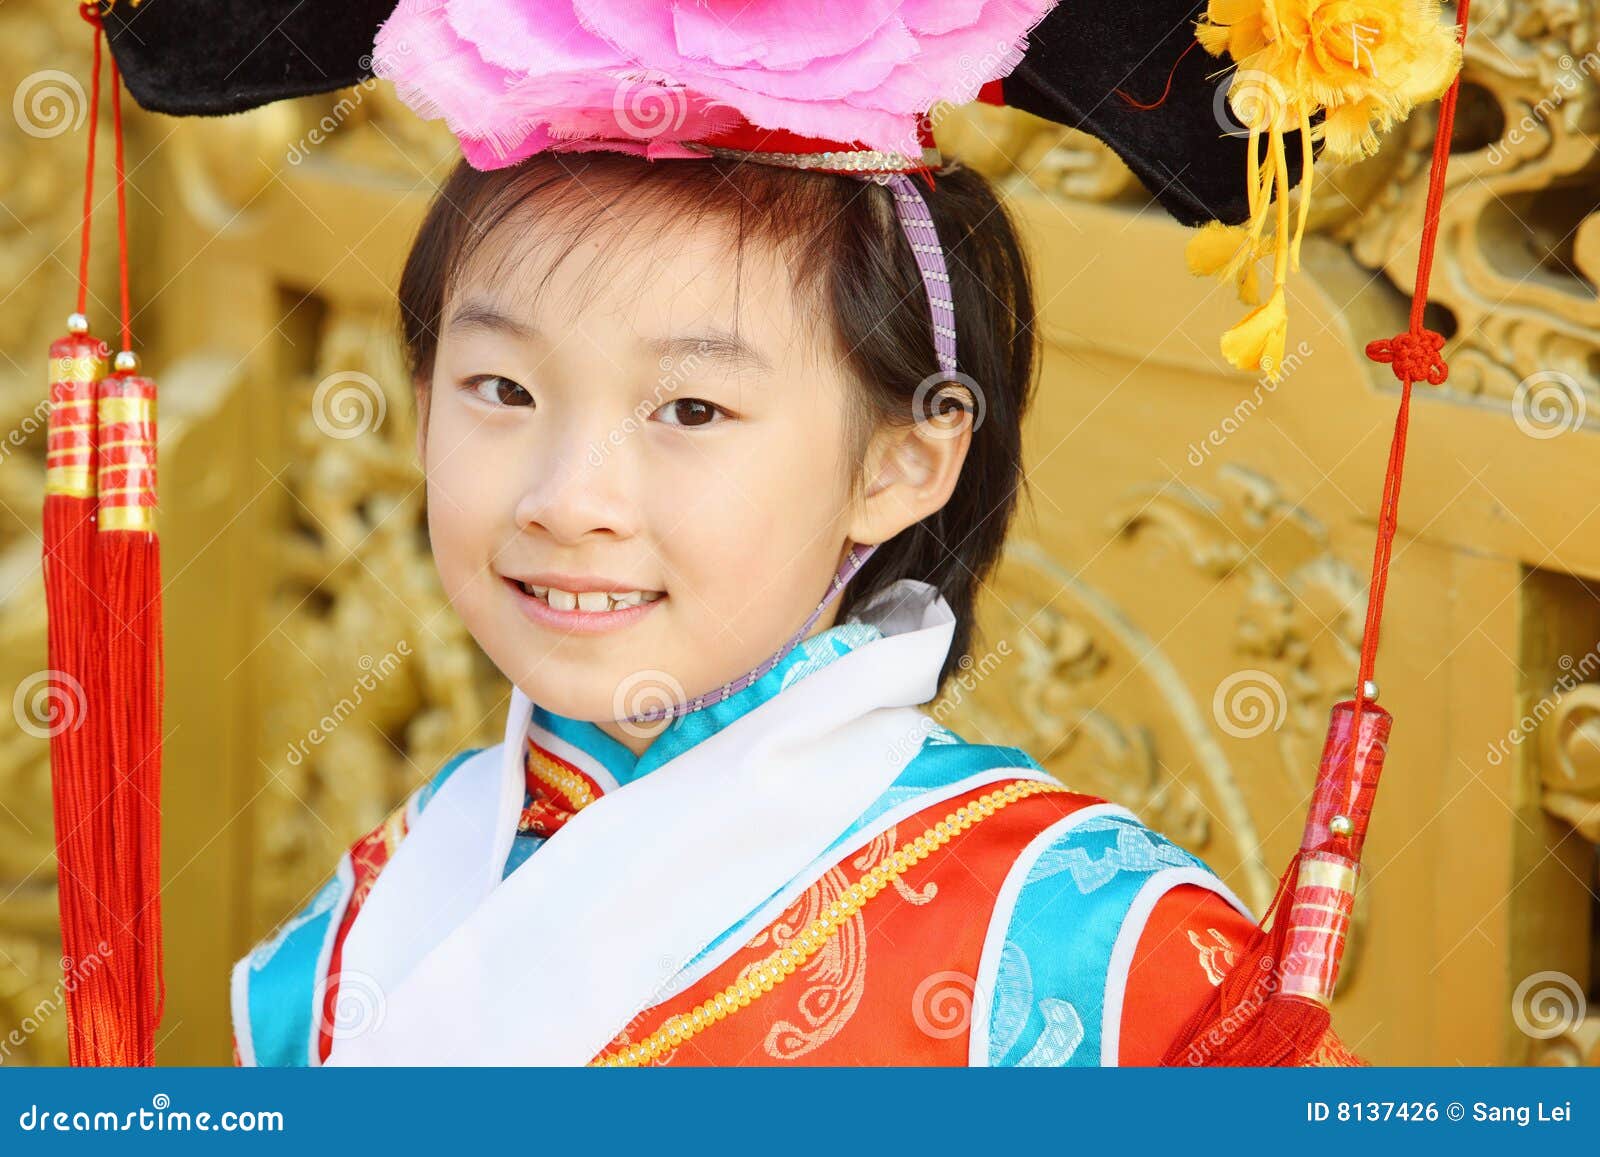 Child stock photo. Image of outdoor, traditional, teen - 8137426